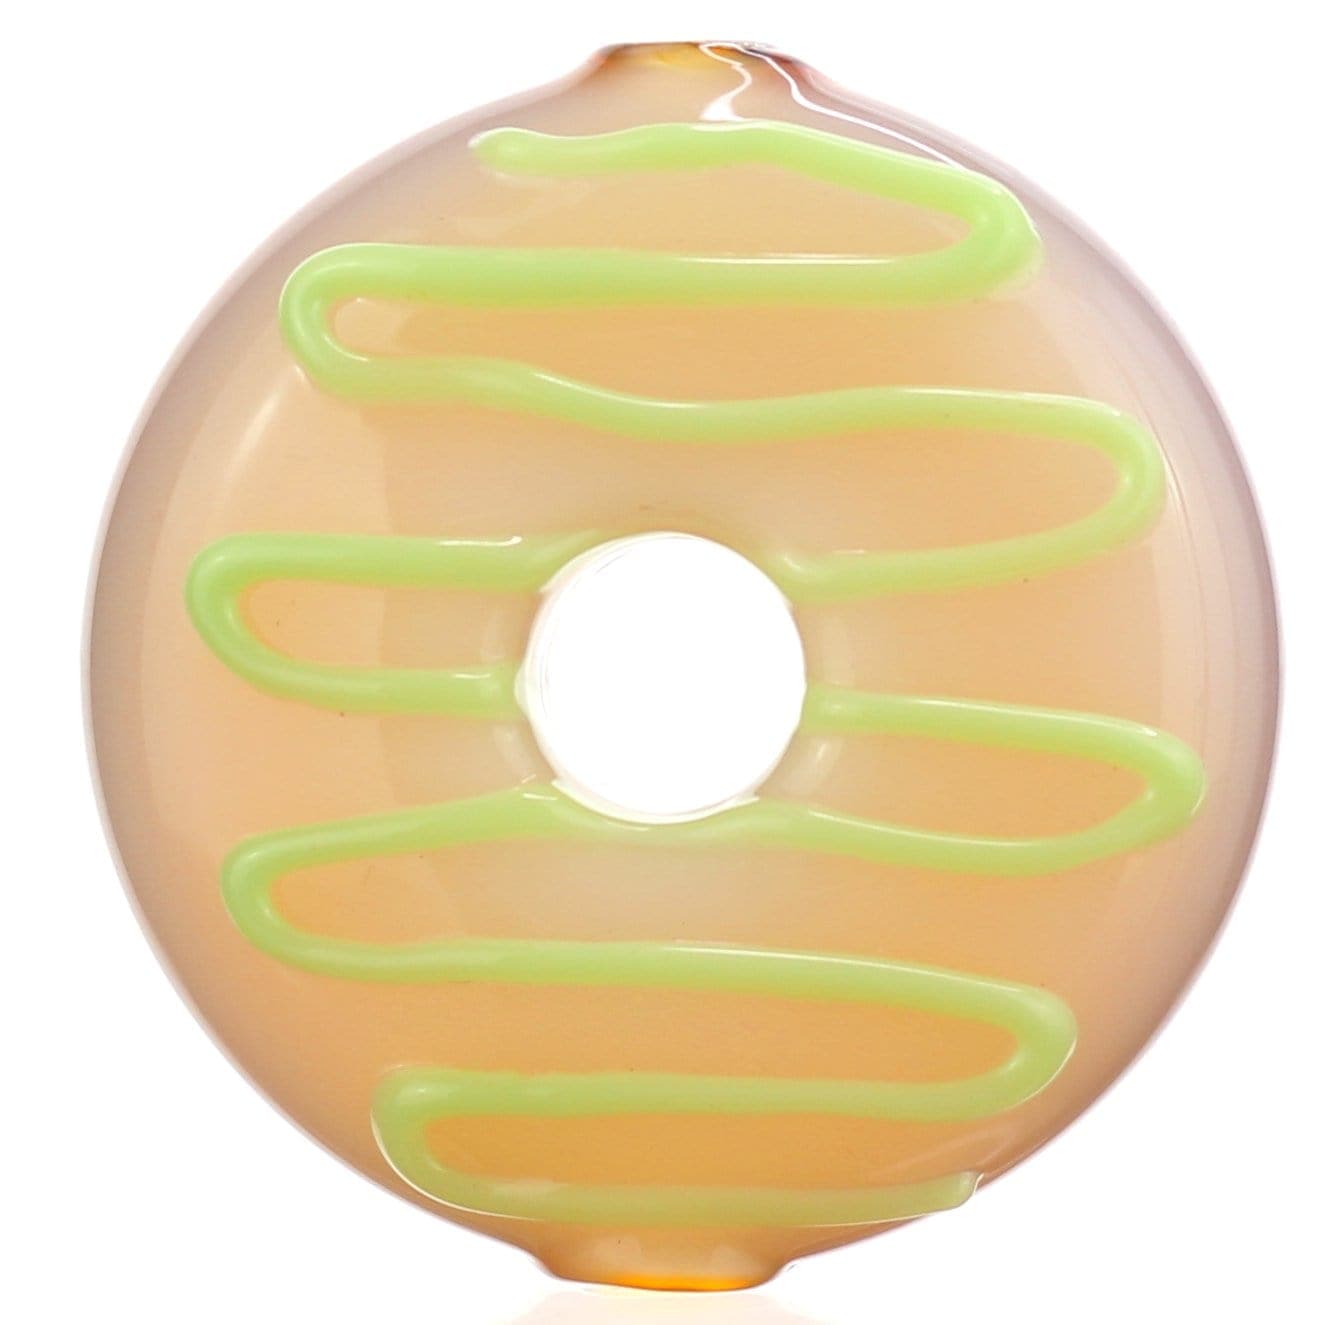 Daily High Club Glass Glazed Daily High Club "Donut" Blunt/Joint Holder + Pendant